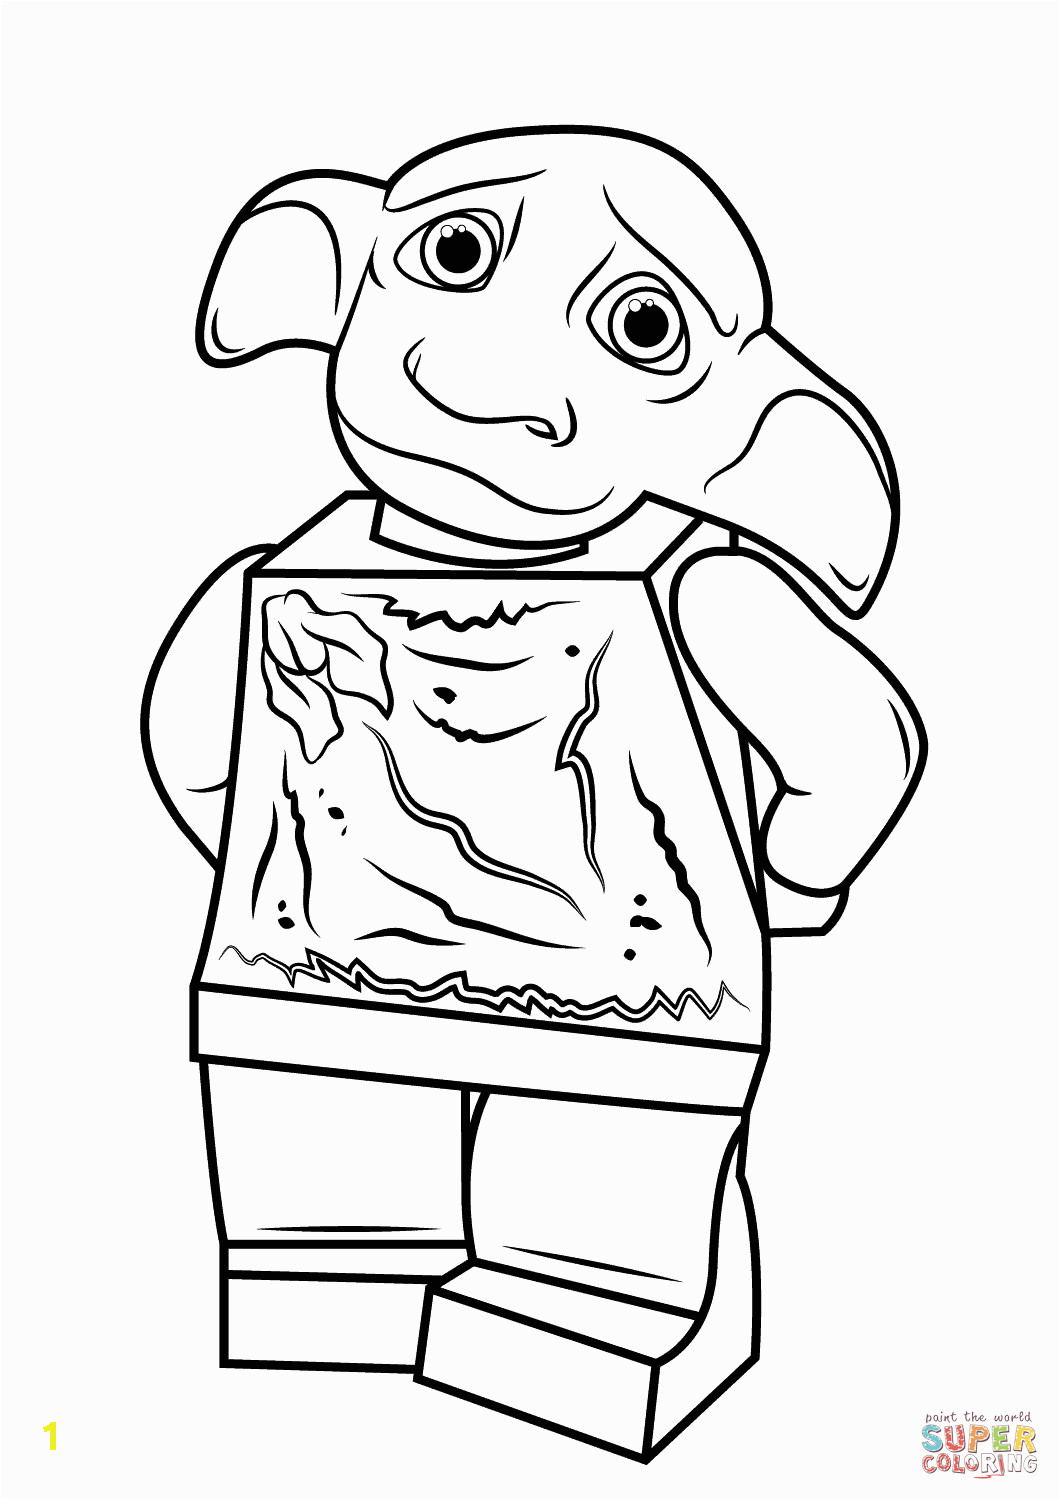 Lego Harry Potter Coloring Pages to Print Lego Harry Potter Dobby Coloring Page